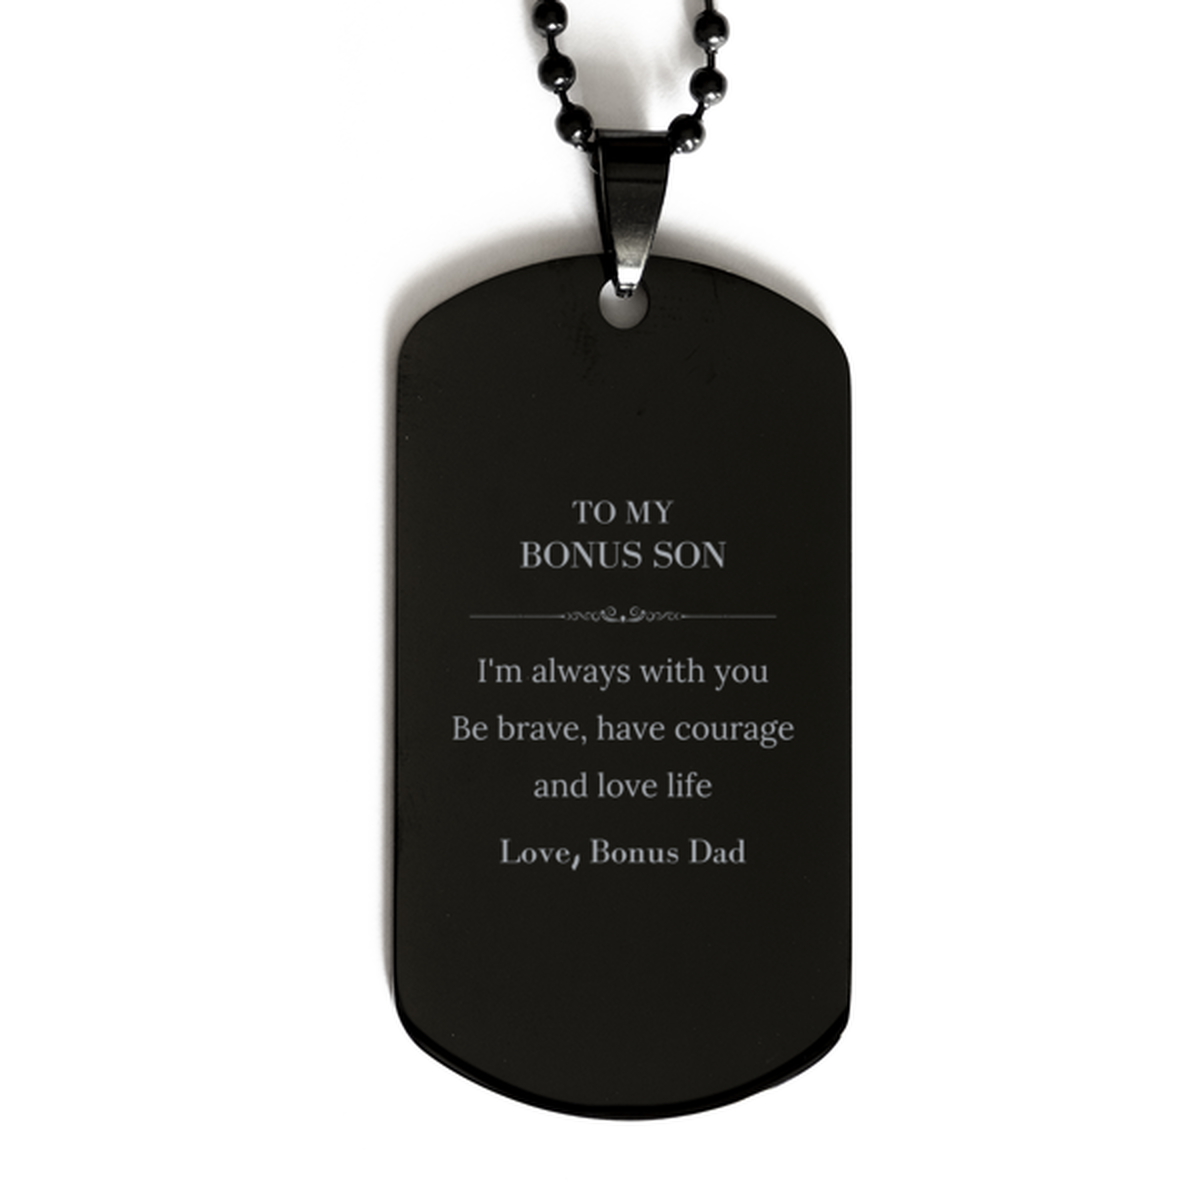 To My Bonus Son Gifts from Bonus Dad, Unique Black Dog Tag Inspirational Christmas Birthday Graduation Gifts for Bonus Son I'm always with you. Be brave, have courage and love life. Love, Bonus Dad